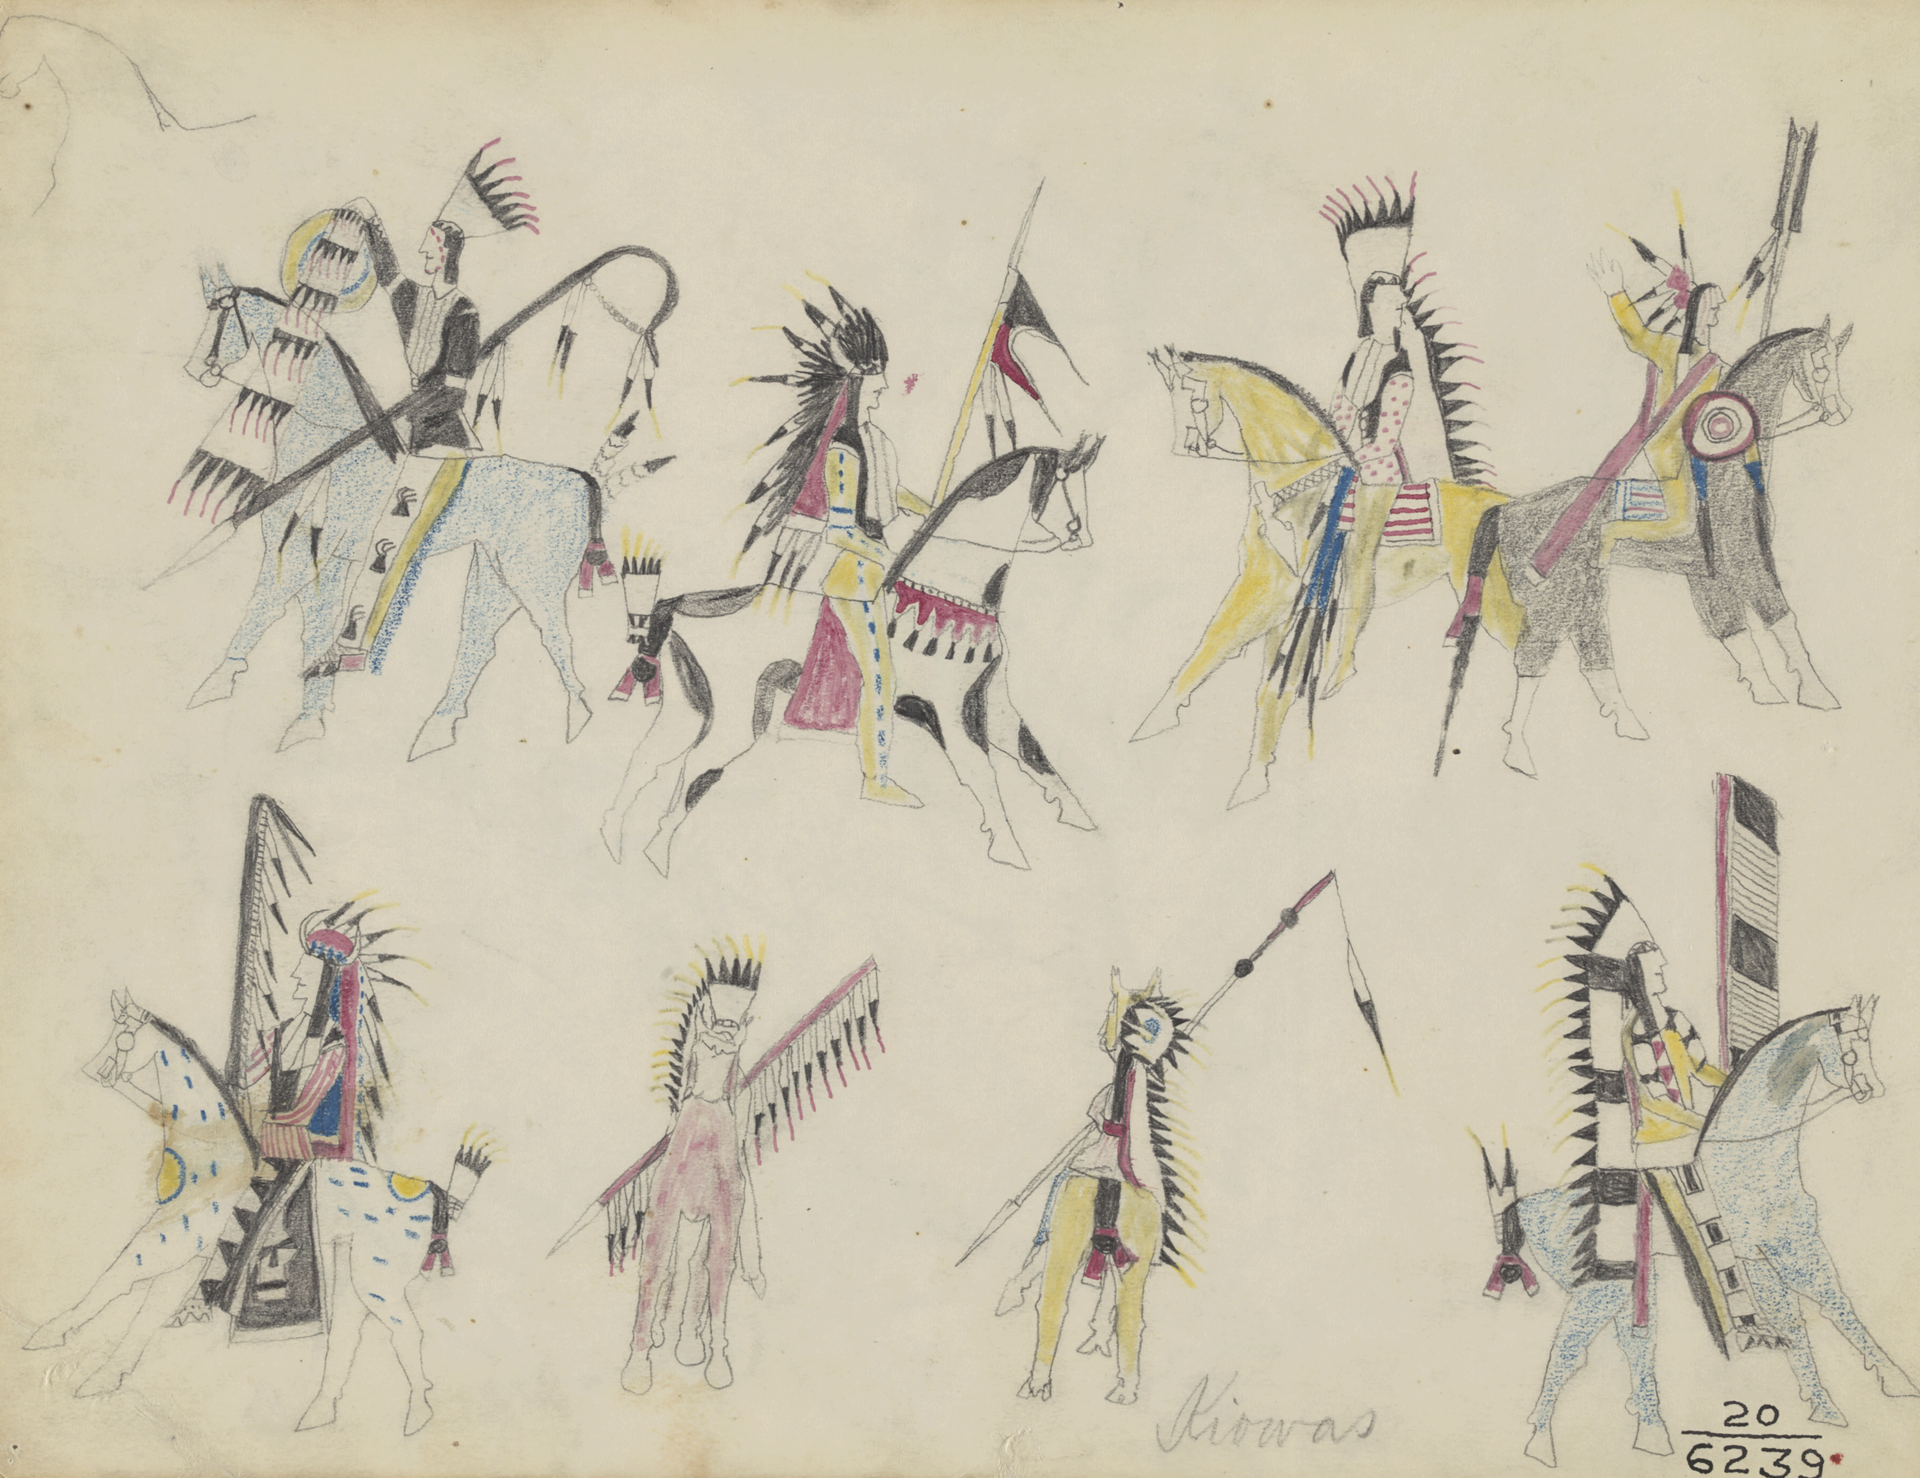 Stylized drawing of eight Native Americans on horseback, rendered in black and pastel blues, yellows, and pale reds. They are elaborately dressed, wearing headdresses and carrying feathered spears. 